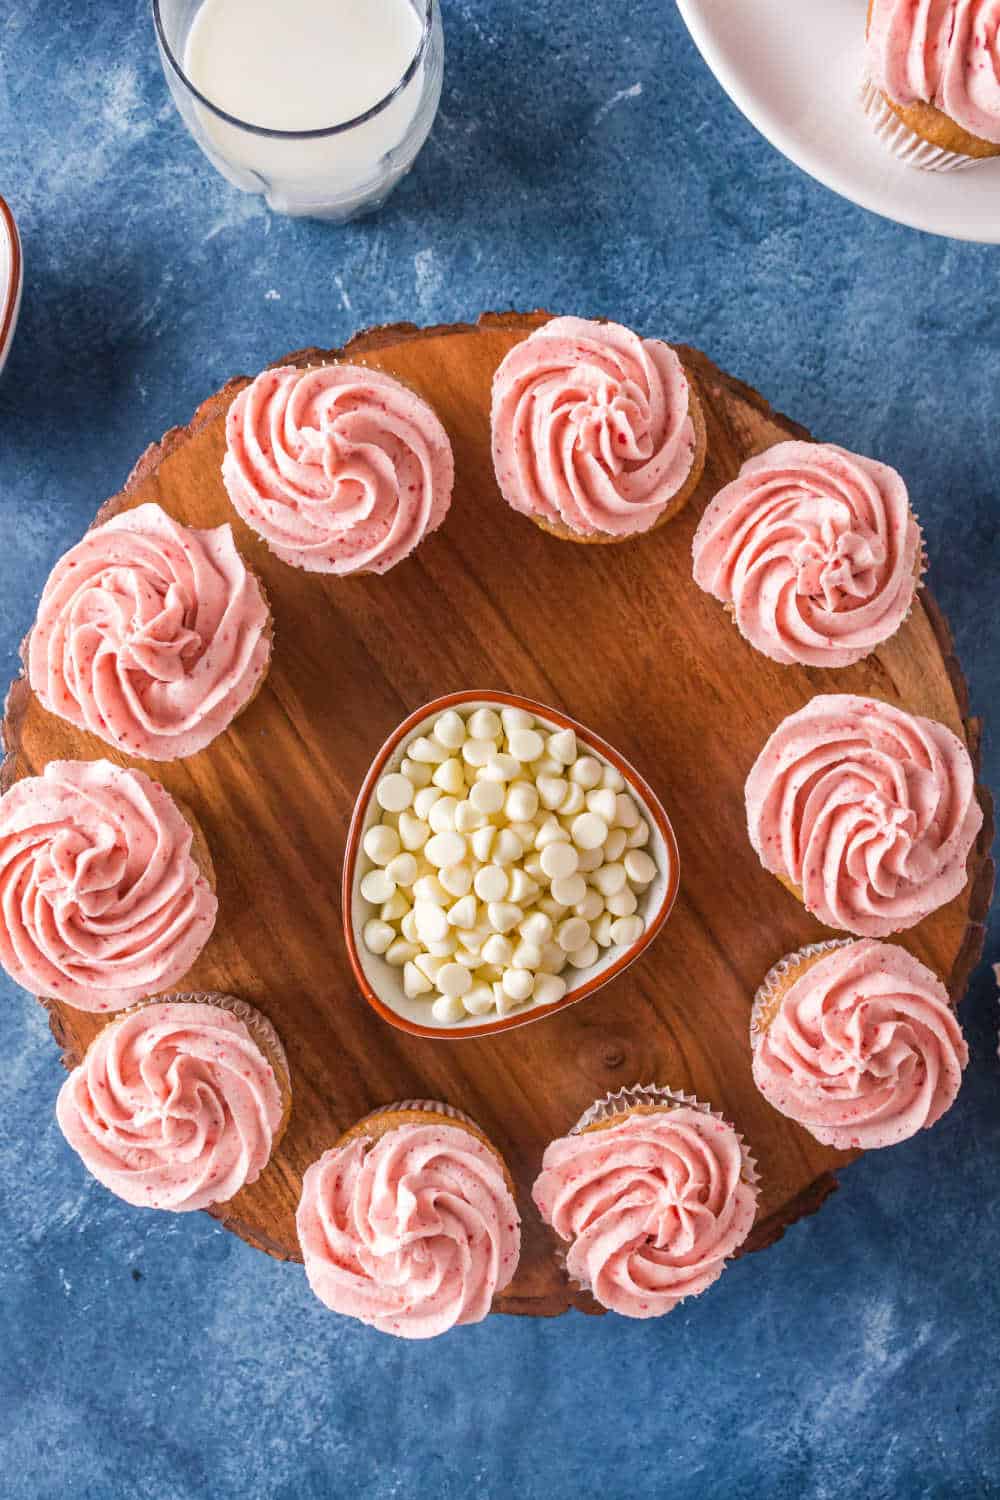 strawberry cupcakes on a circular wooden platter with a bowl of white chocolate chips